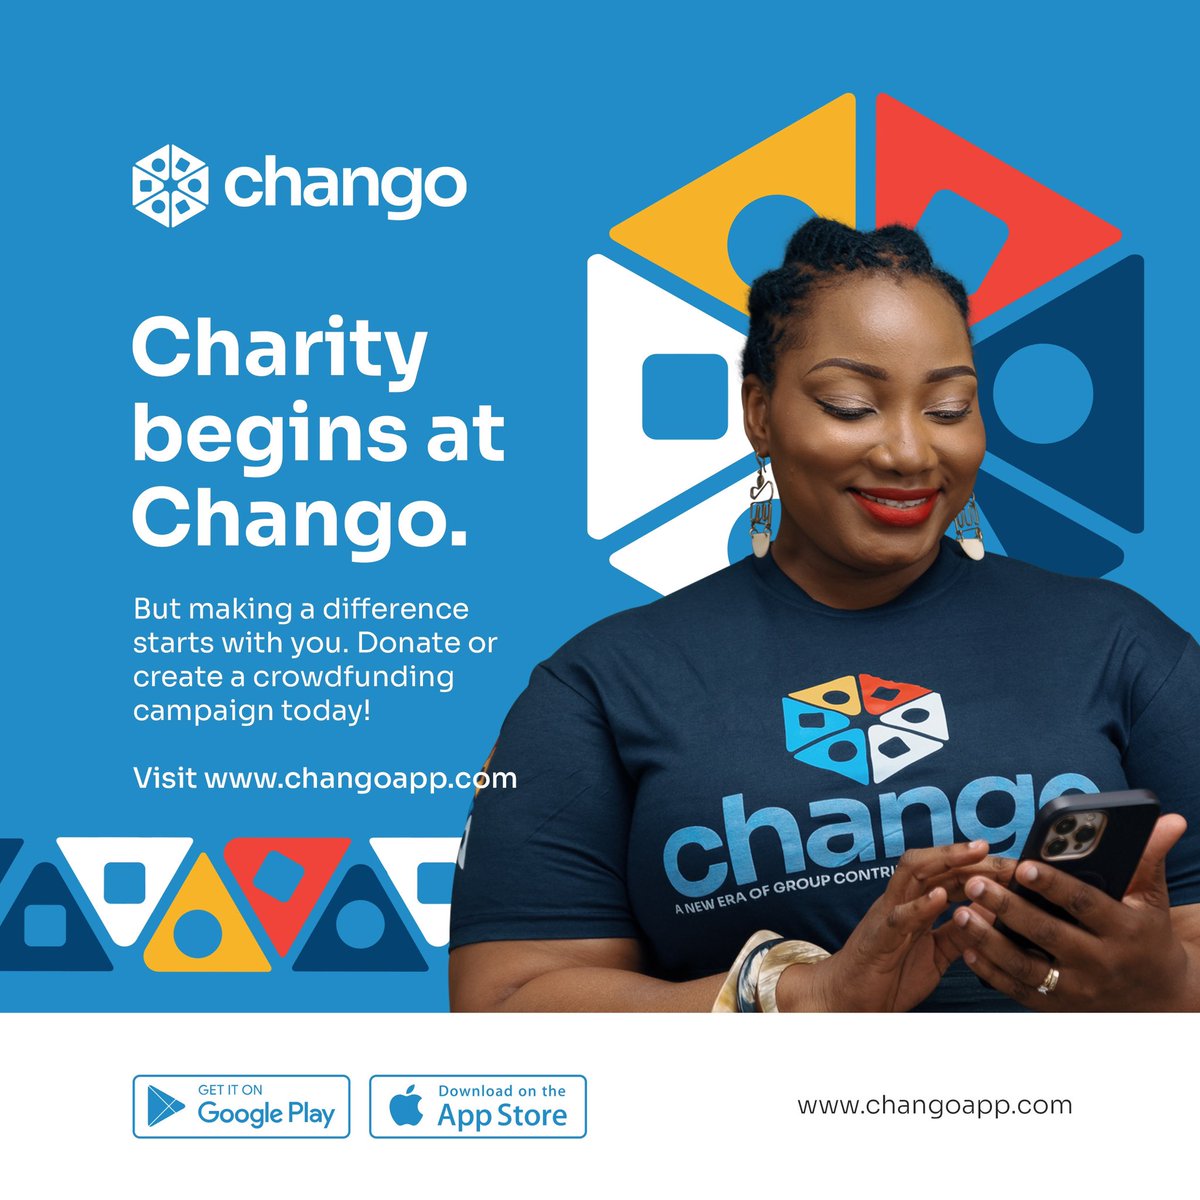 Empower your charity with Chango! Create crowdfunding campaigns or donate securely to causes you care about. Every contribution, big or small, brings positive impact. Visit changoapp.com to learn more. #Changoapp #CrowdfundingInGhana #GhanaianCrowdfundingPlatform